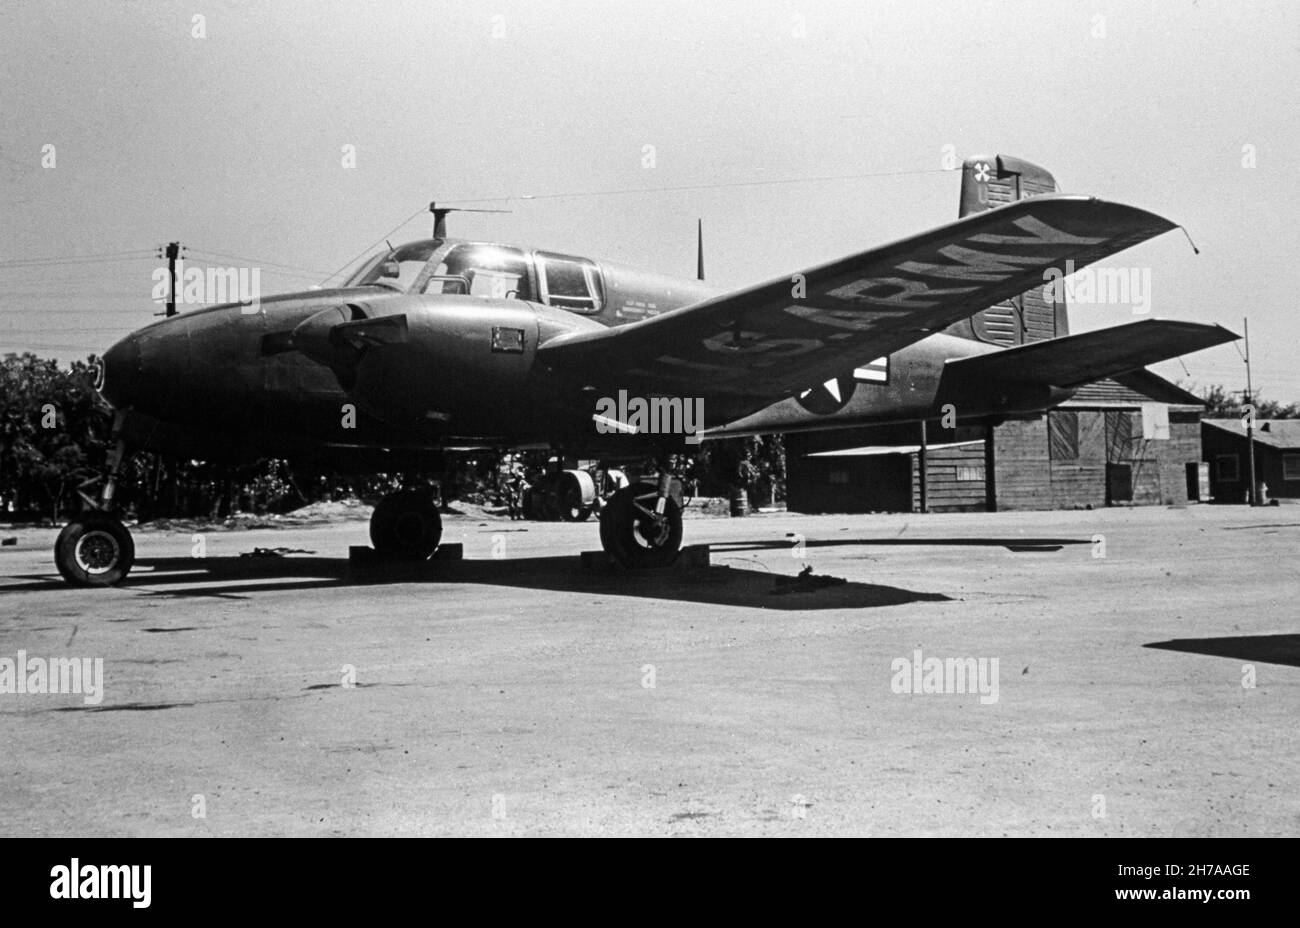 A photograph showing a Beech L-23A Seminole, serial number 52-6187, of the United States Army, taken at Airstrip A-2 near Seoul during the Korean War, in 1953 or 1954. Stock Photo